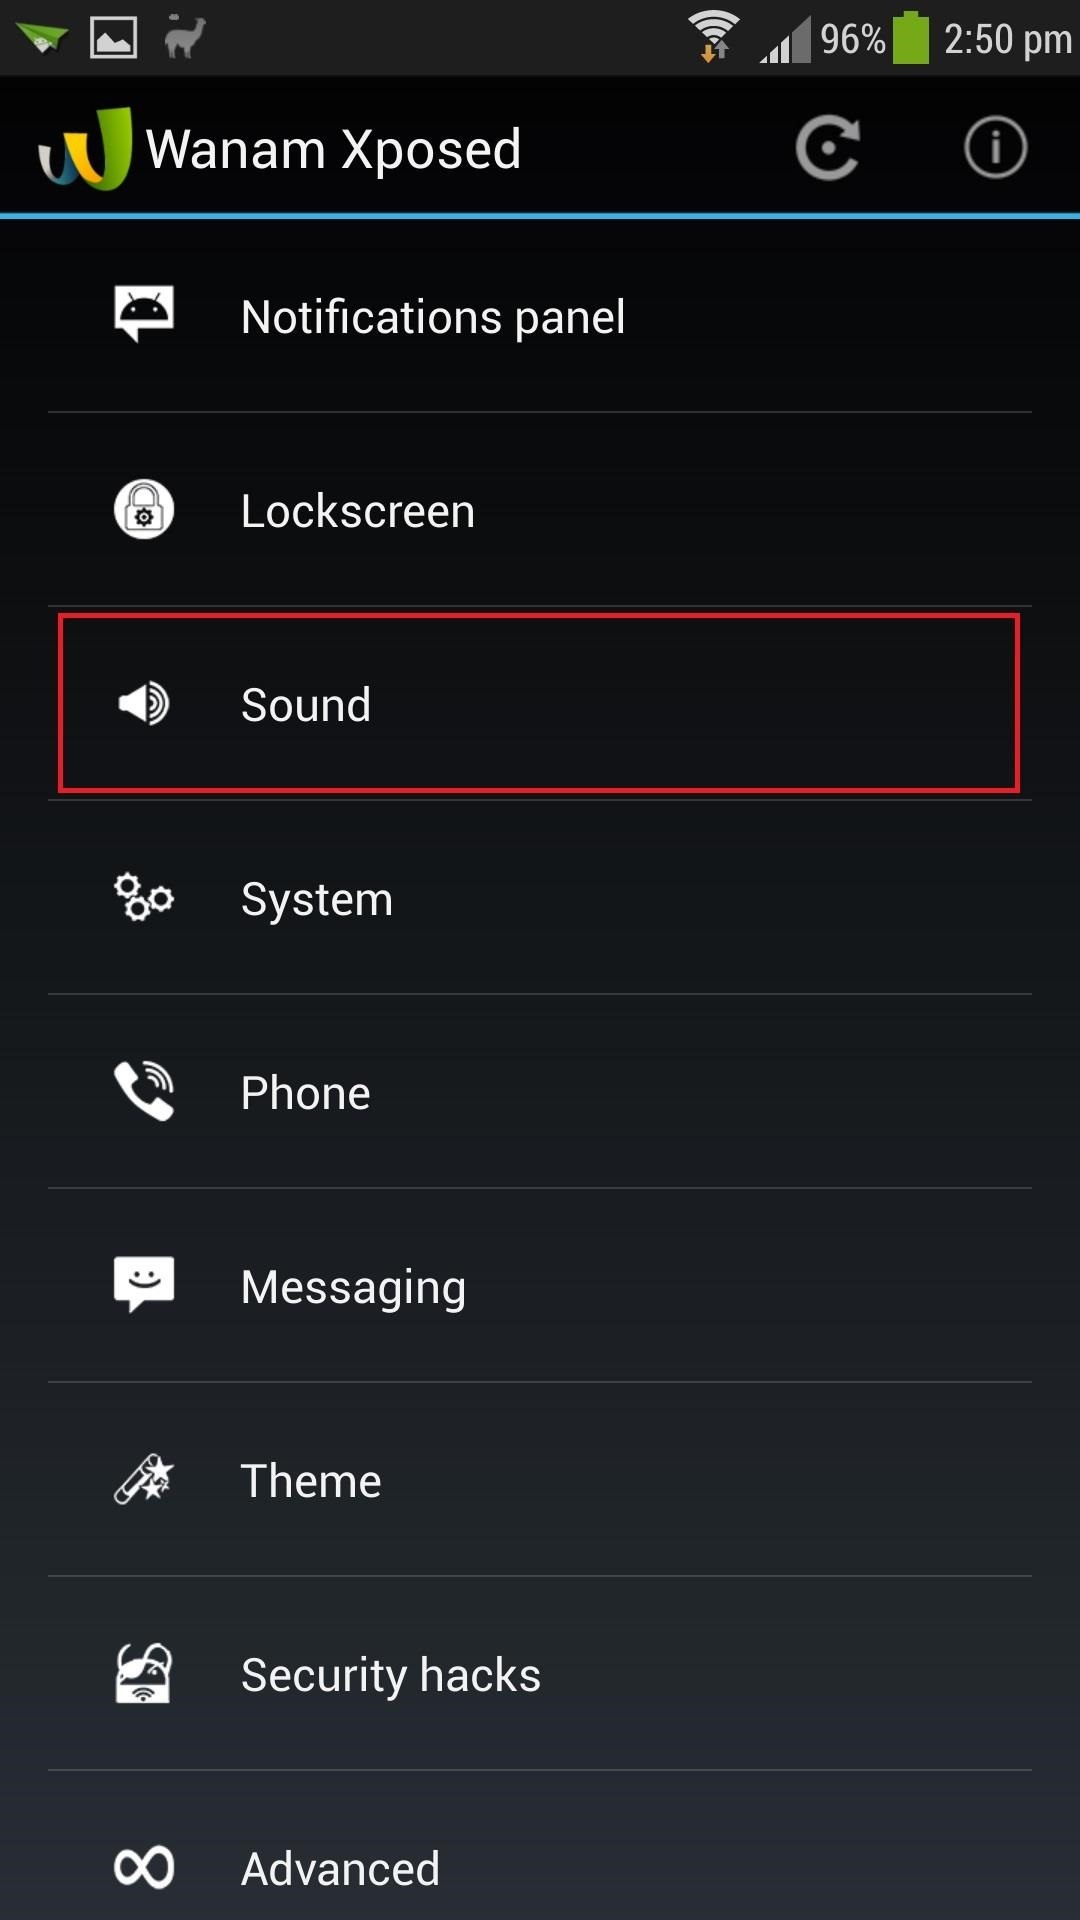 How to Get Rid of the Annoying "High Volume" Alert When Using Headphones on Your Samsung Galaxy S4